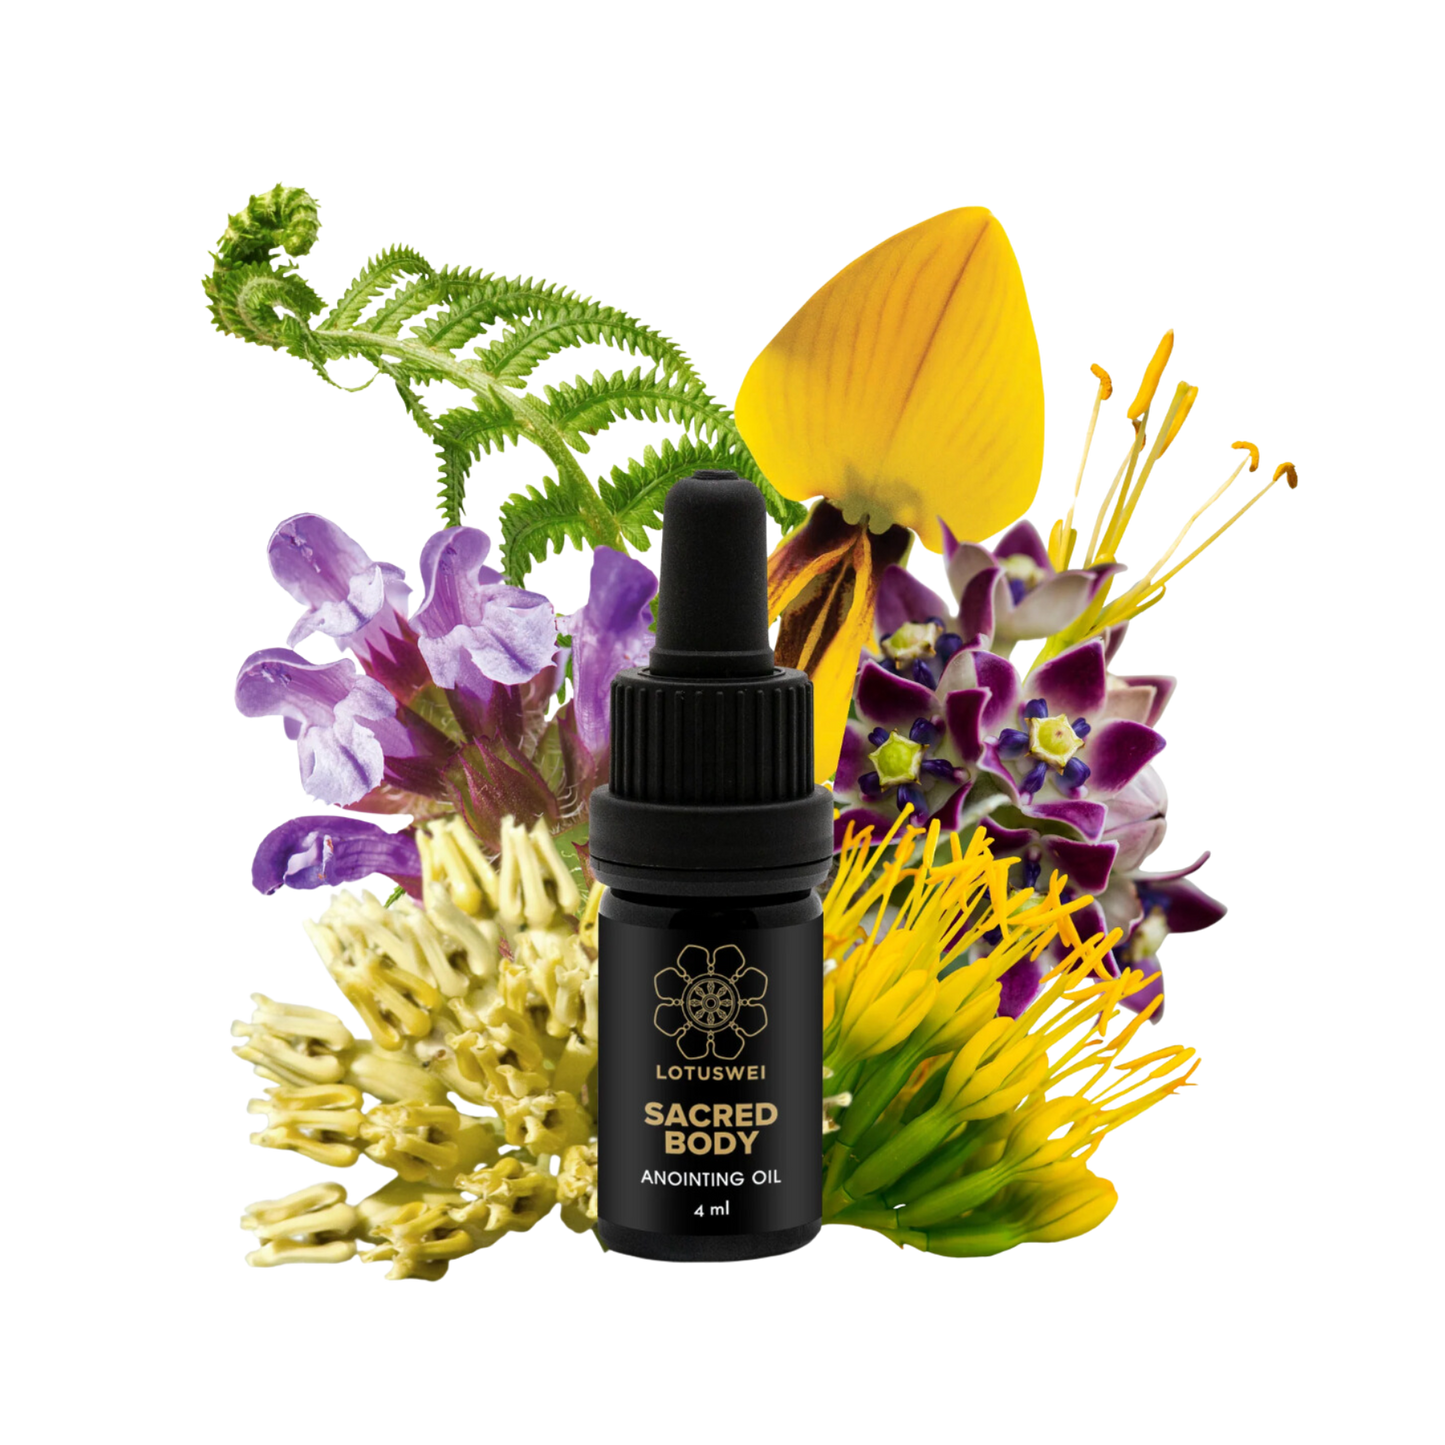 LotusWei Sacred Body Anointing Oil